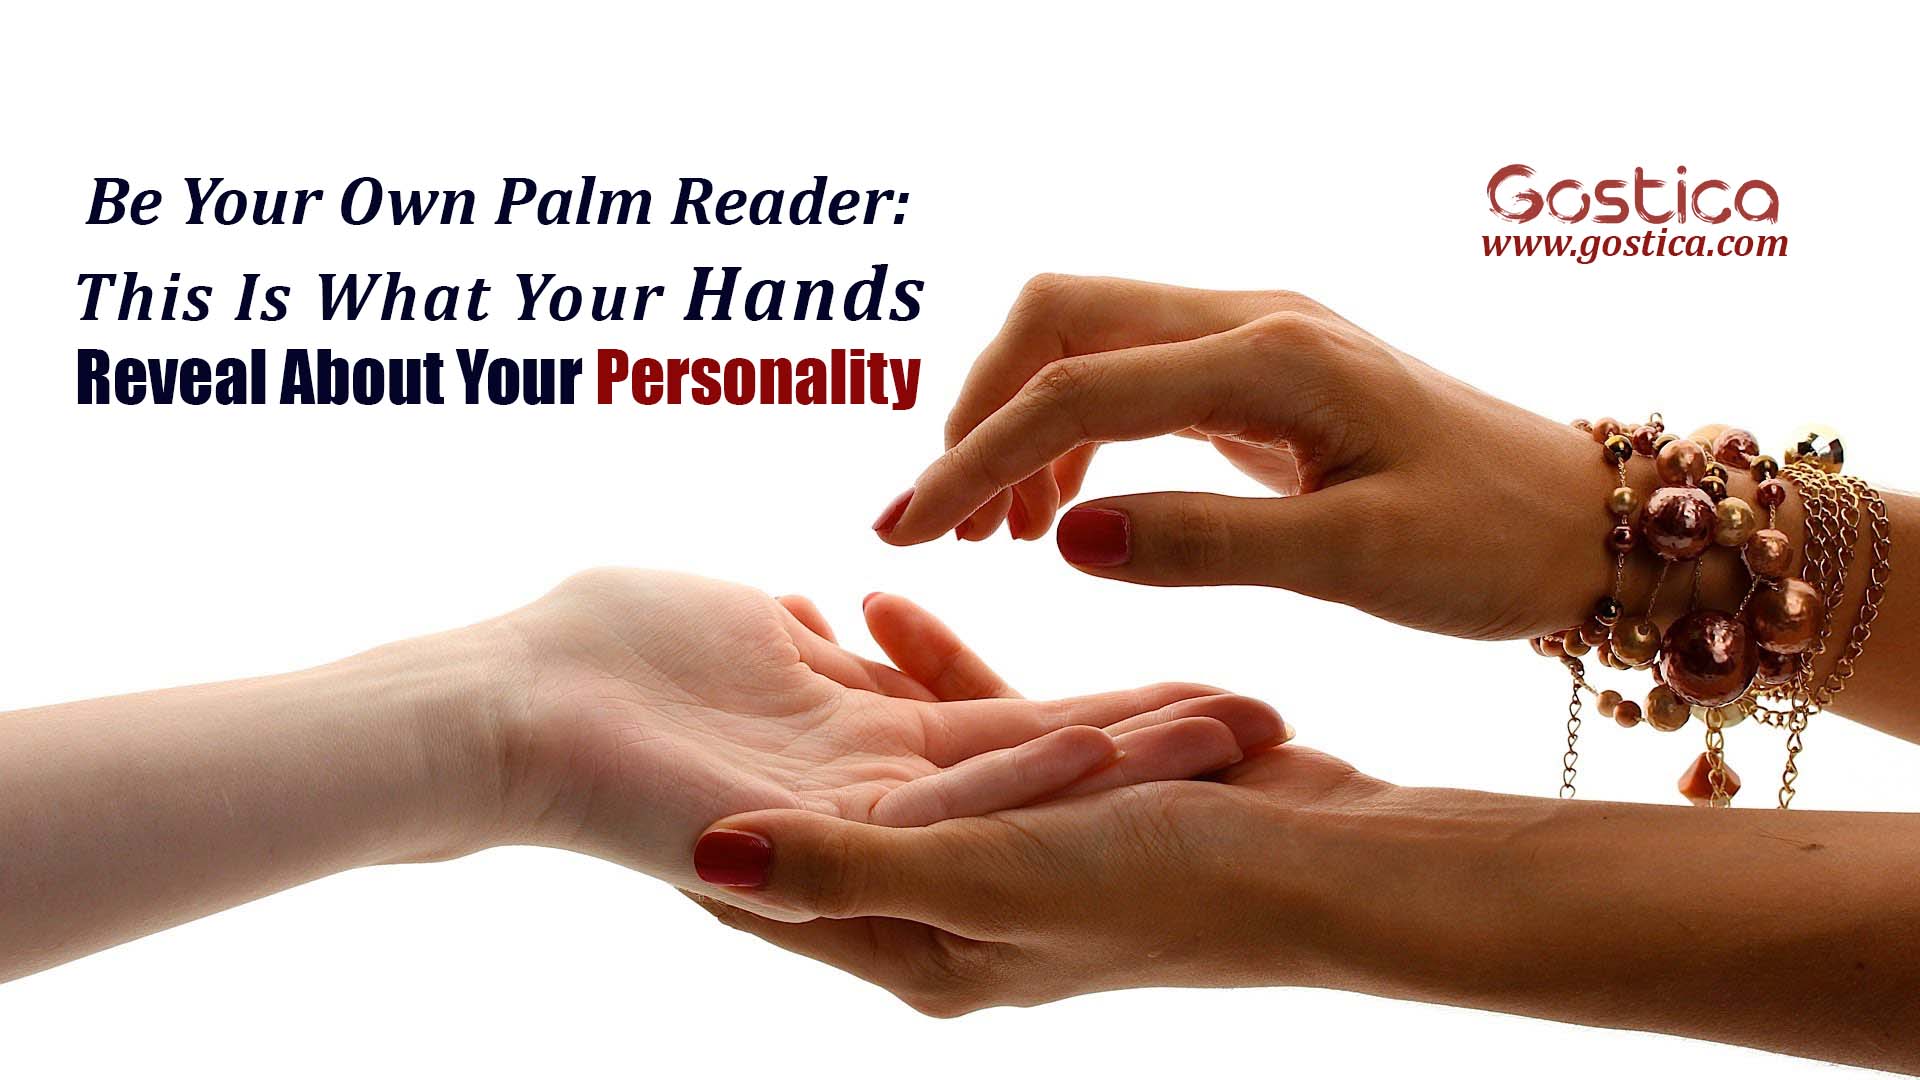 Be-Your-Own-Palm-Reader-This-Is-What-Your-Hands-Reveal-About-Your-Personality.jpg